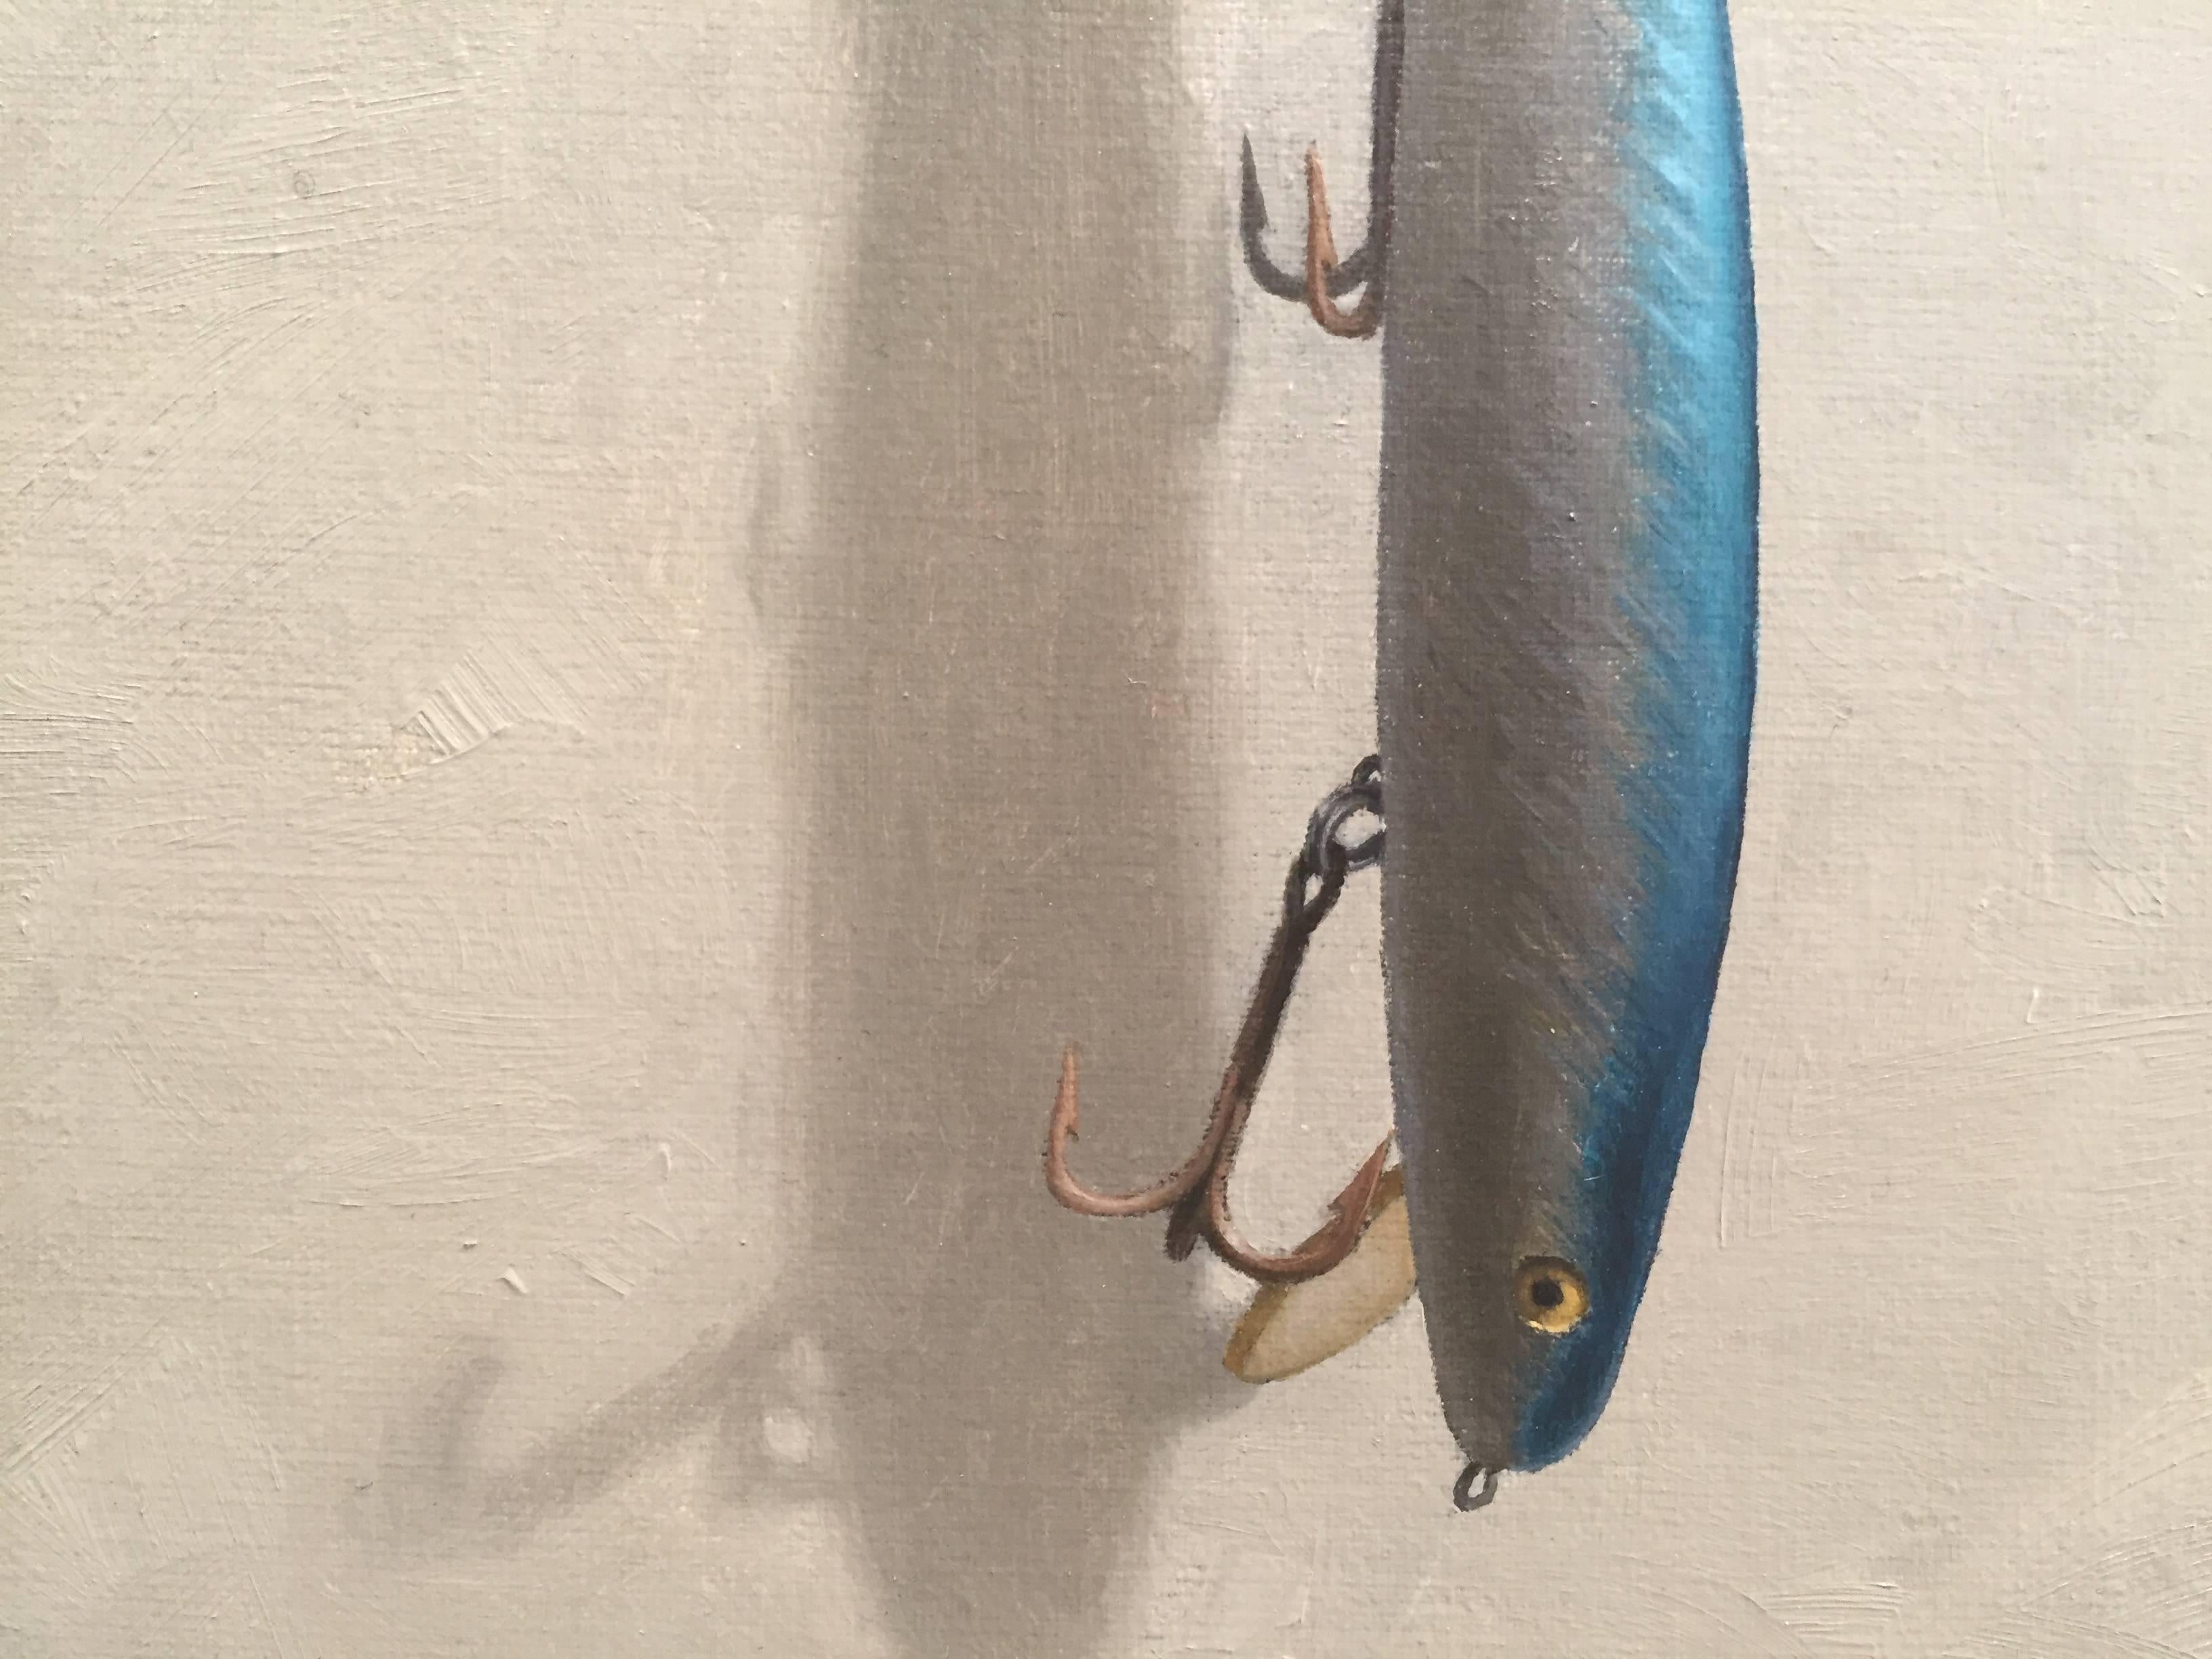 Painted from life in his Connecticut studio, Morfis paints a shimmering life-like fishing lure. Hanging from a tiny metal nail via an anchor shaped hook, the fish-like lure dangles upside down. The eye of the fish glares at the viewer impatiently. A